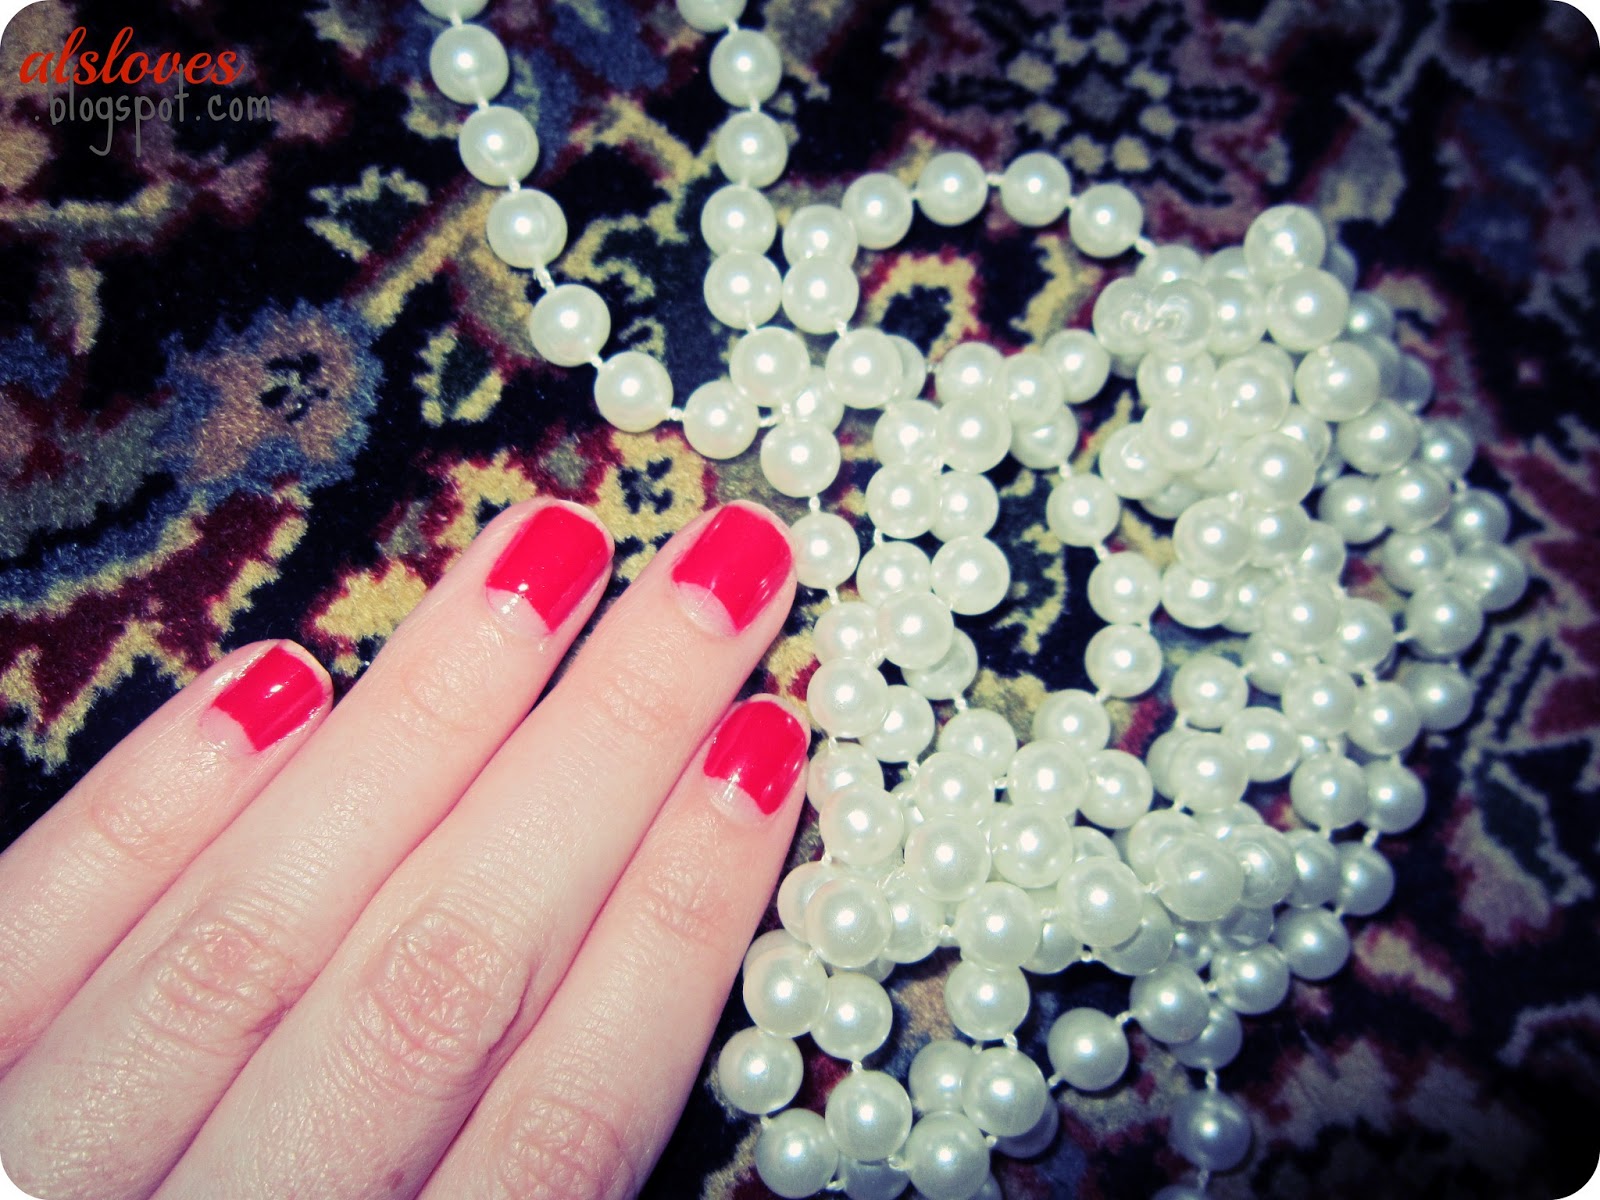 5. "The Perfect Flapper Nails: 1920s Nail Polish Colors" - wide 8